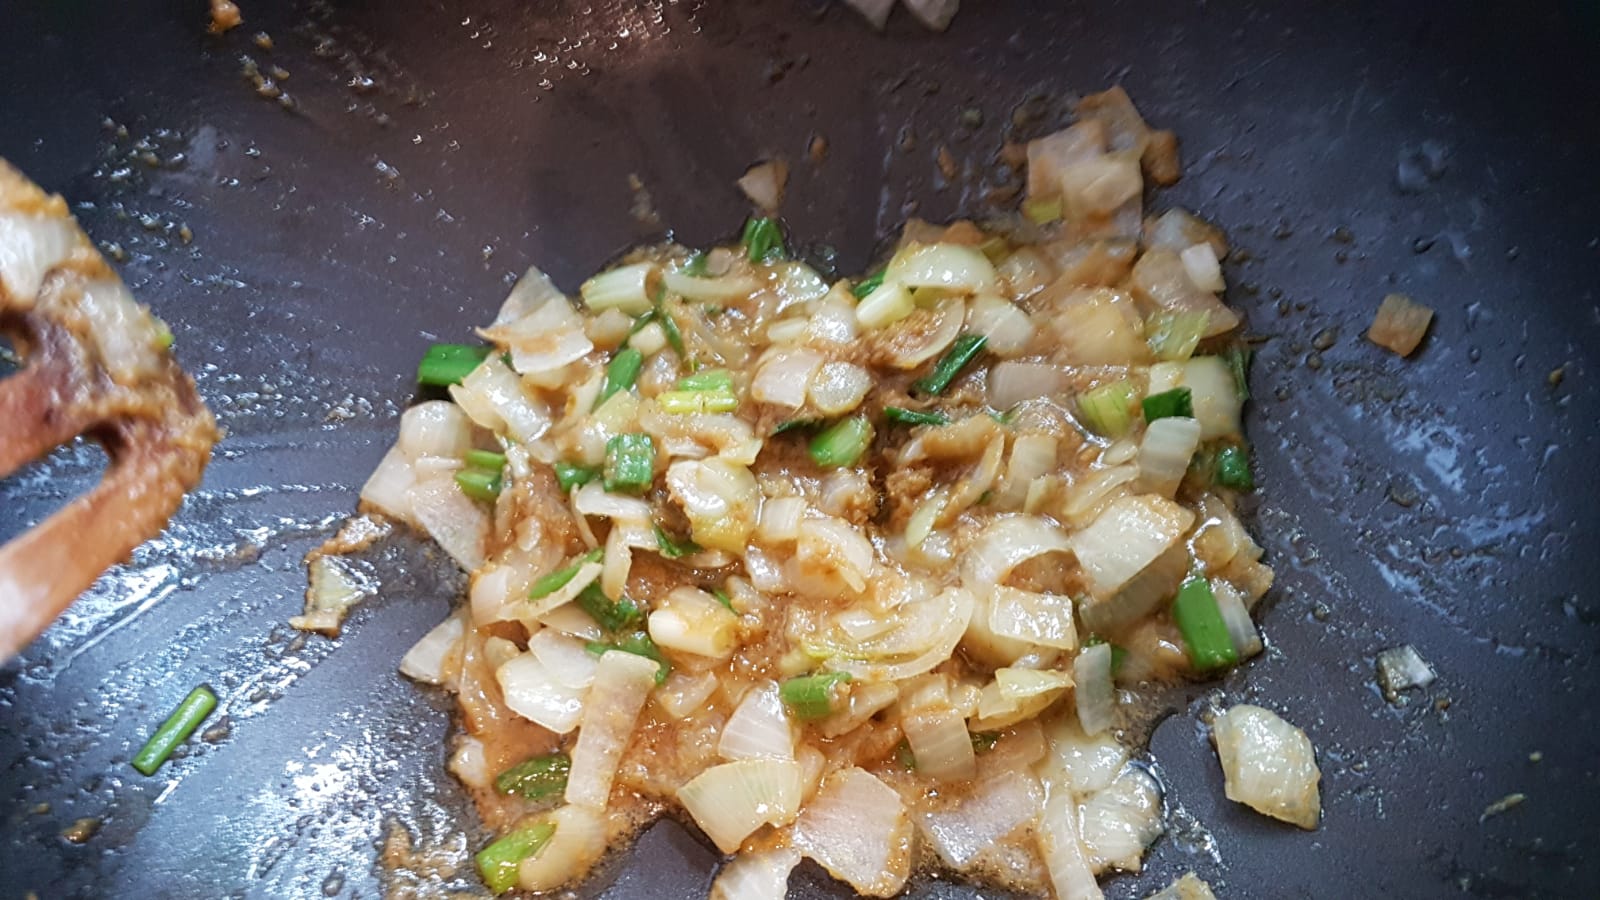 Fry the onions, spring onions and the curry